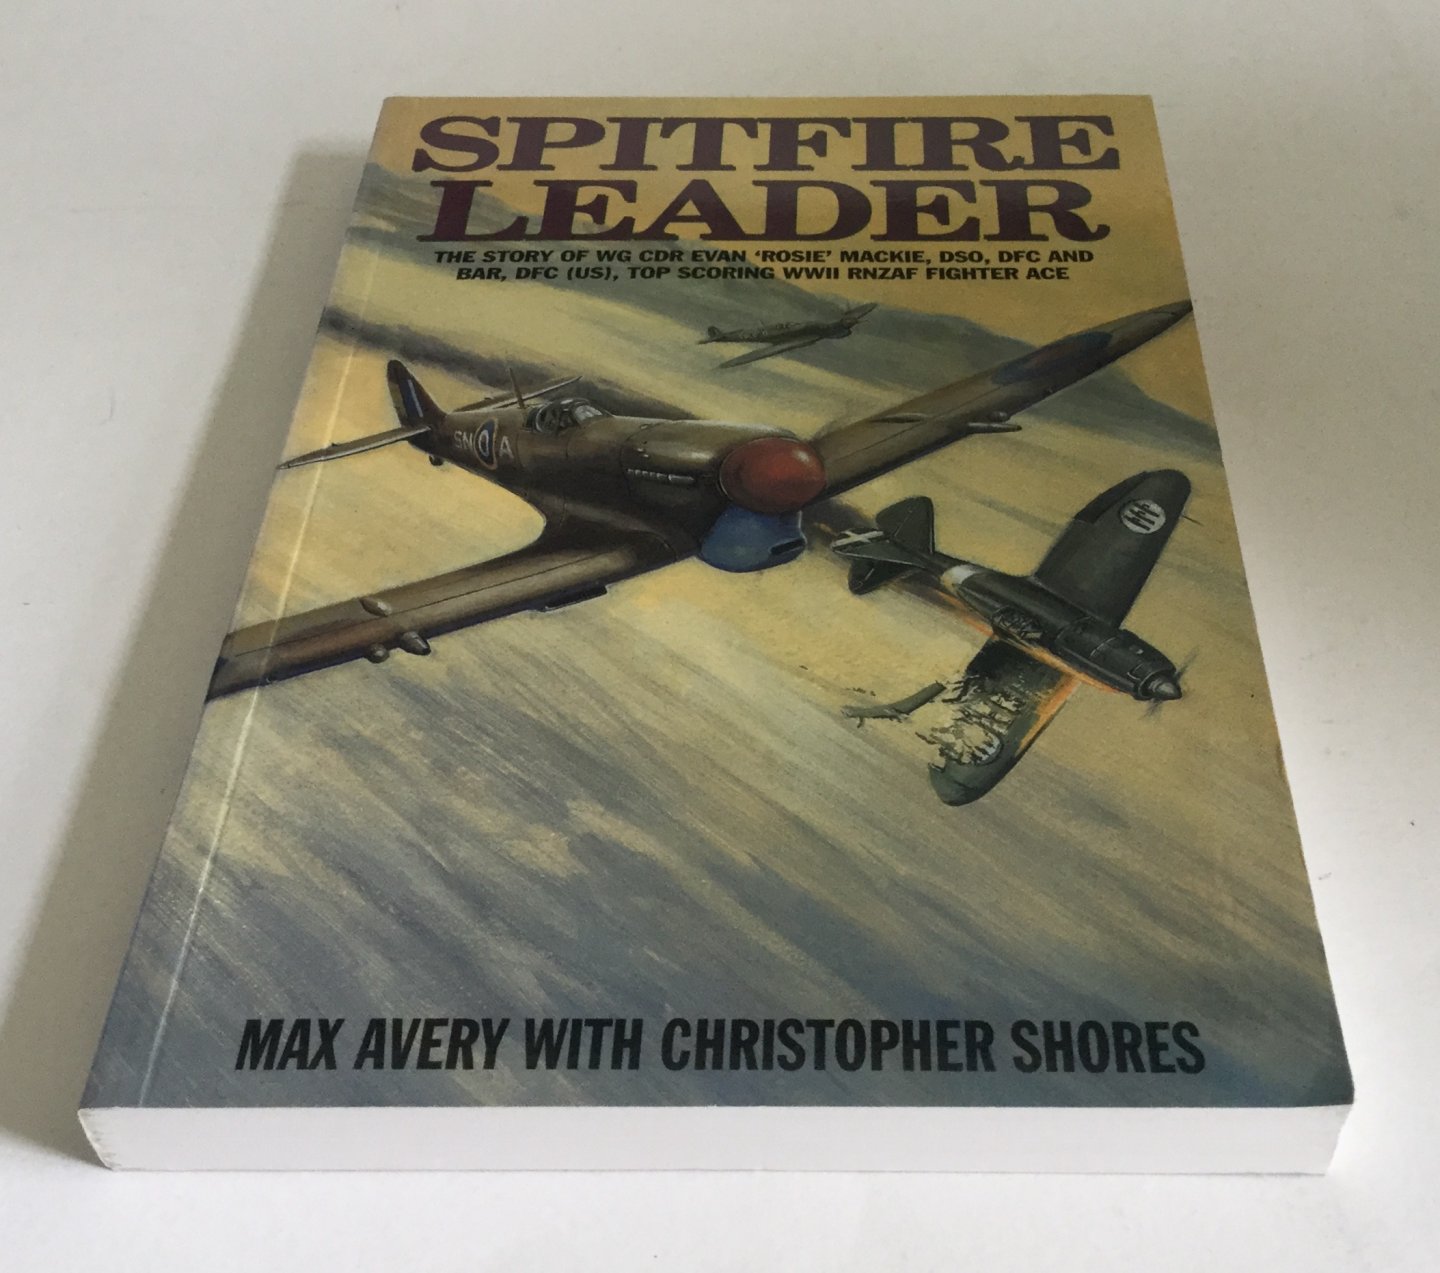 Avery, Max with Christopher Shores - Spitfire Leader: The Story of WG CDR Evan 'Rosie' Mackie, DSO, DFC and BAR, DFC (Us), Top Scoring WWII RNZAF Fighter Ace